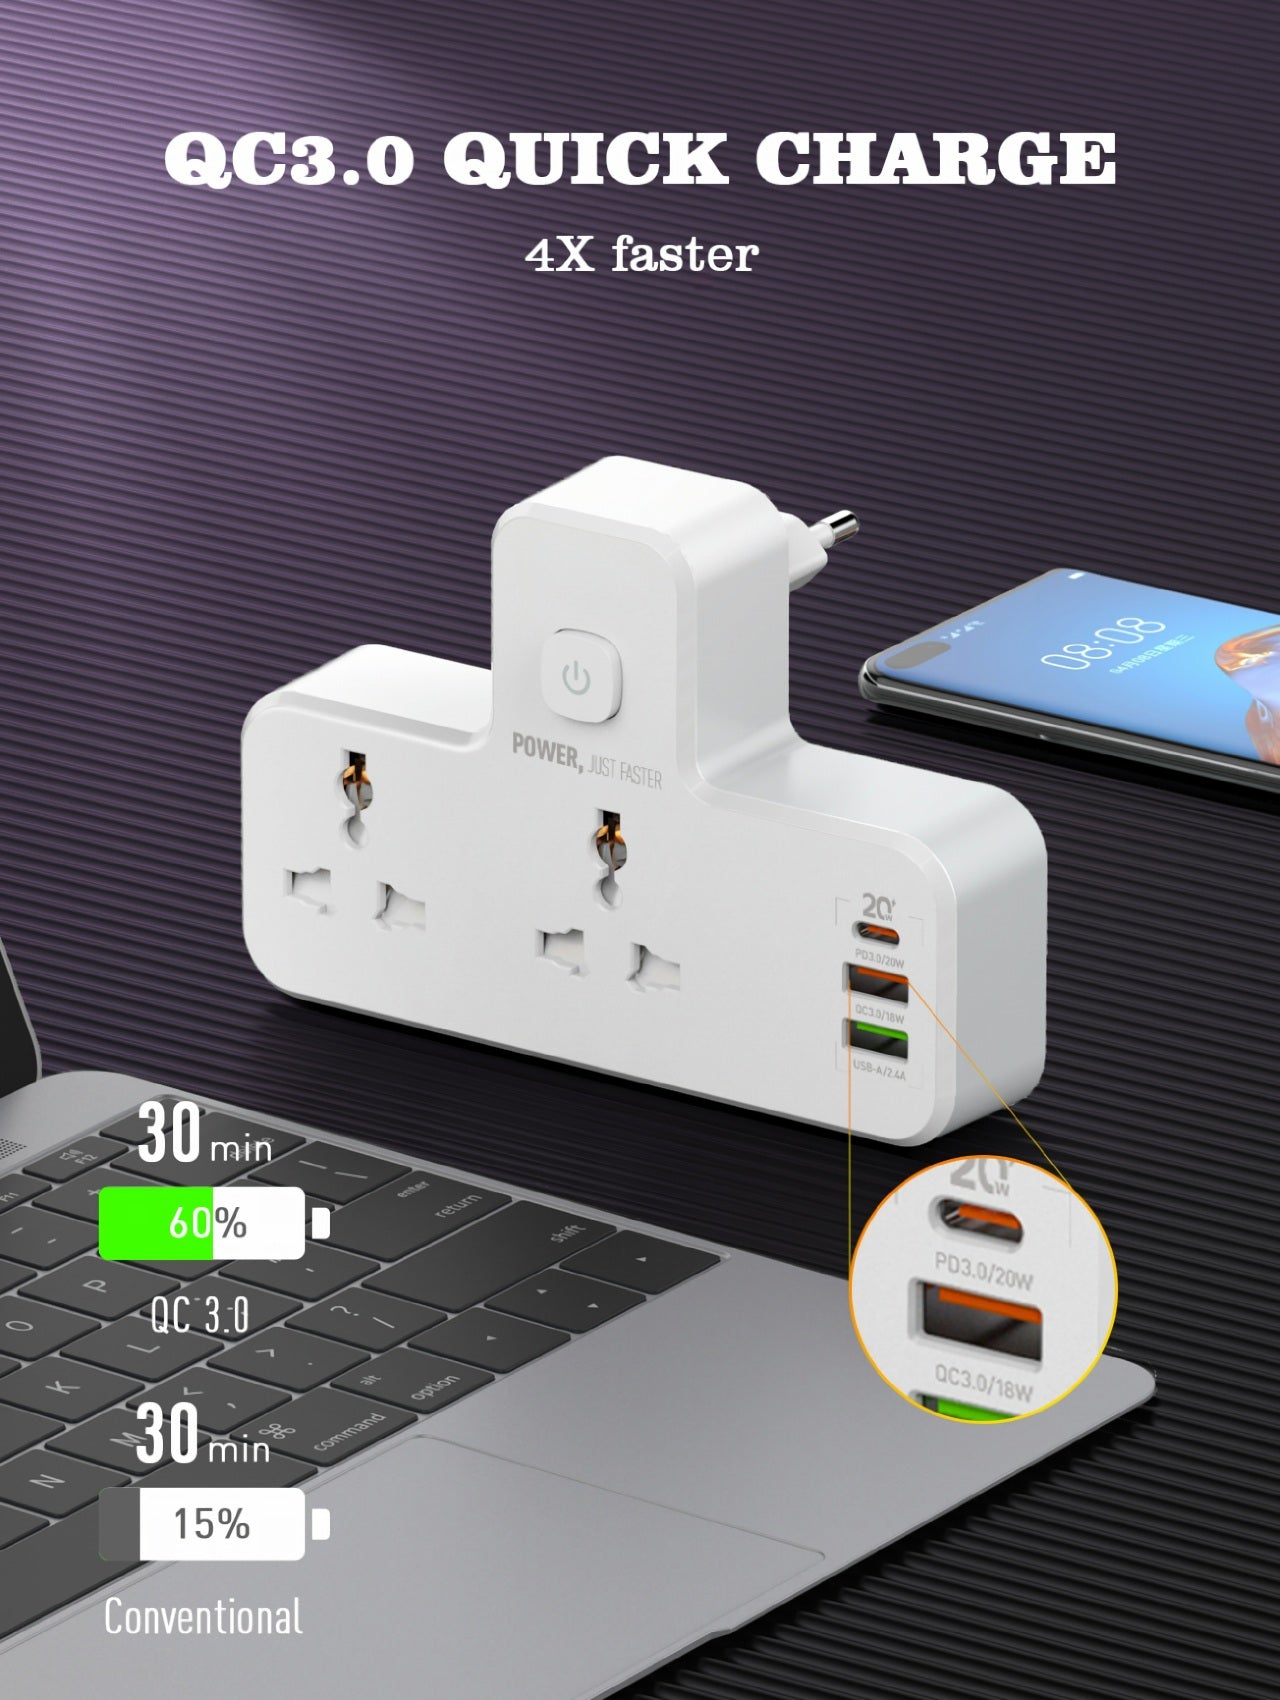 Glassology Multi 3 in 1 Power Extension Plug Outlet Splitter, 20W USB-C PD Quick Charge Port, 2 USB-A QC3.0, 2 Universal Outlets Power Extender for Home Office Dorm Room Essentials